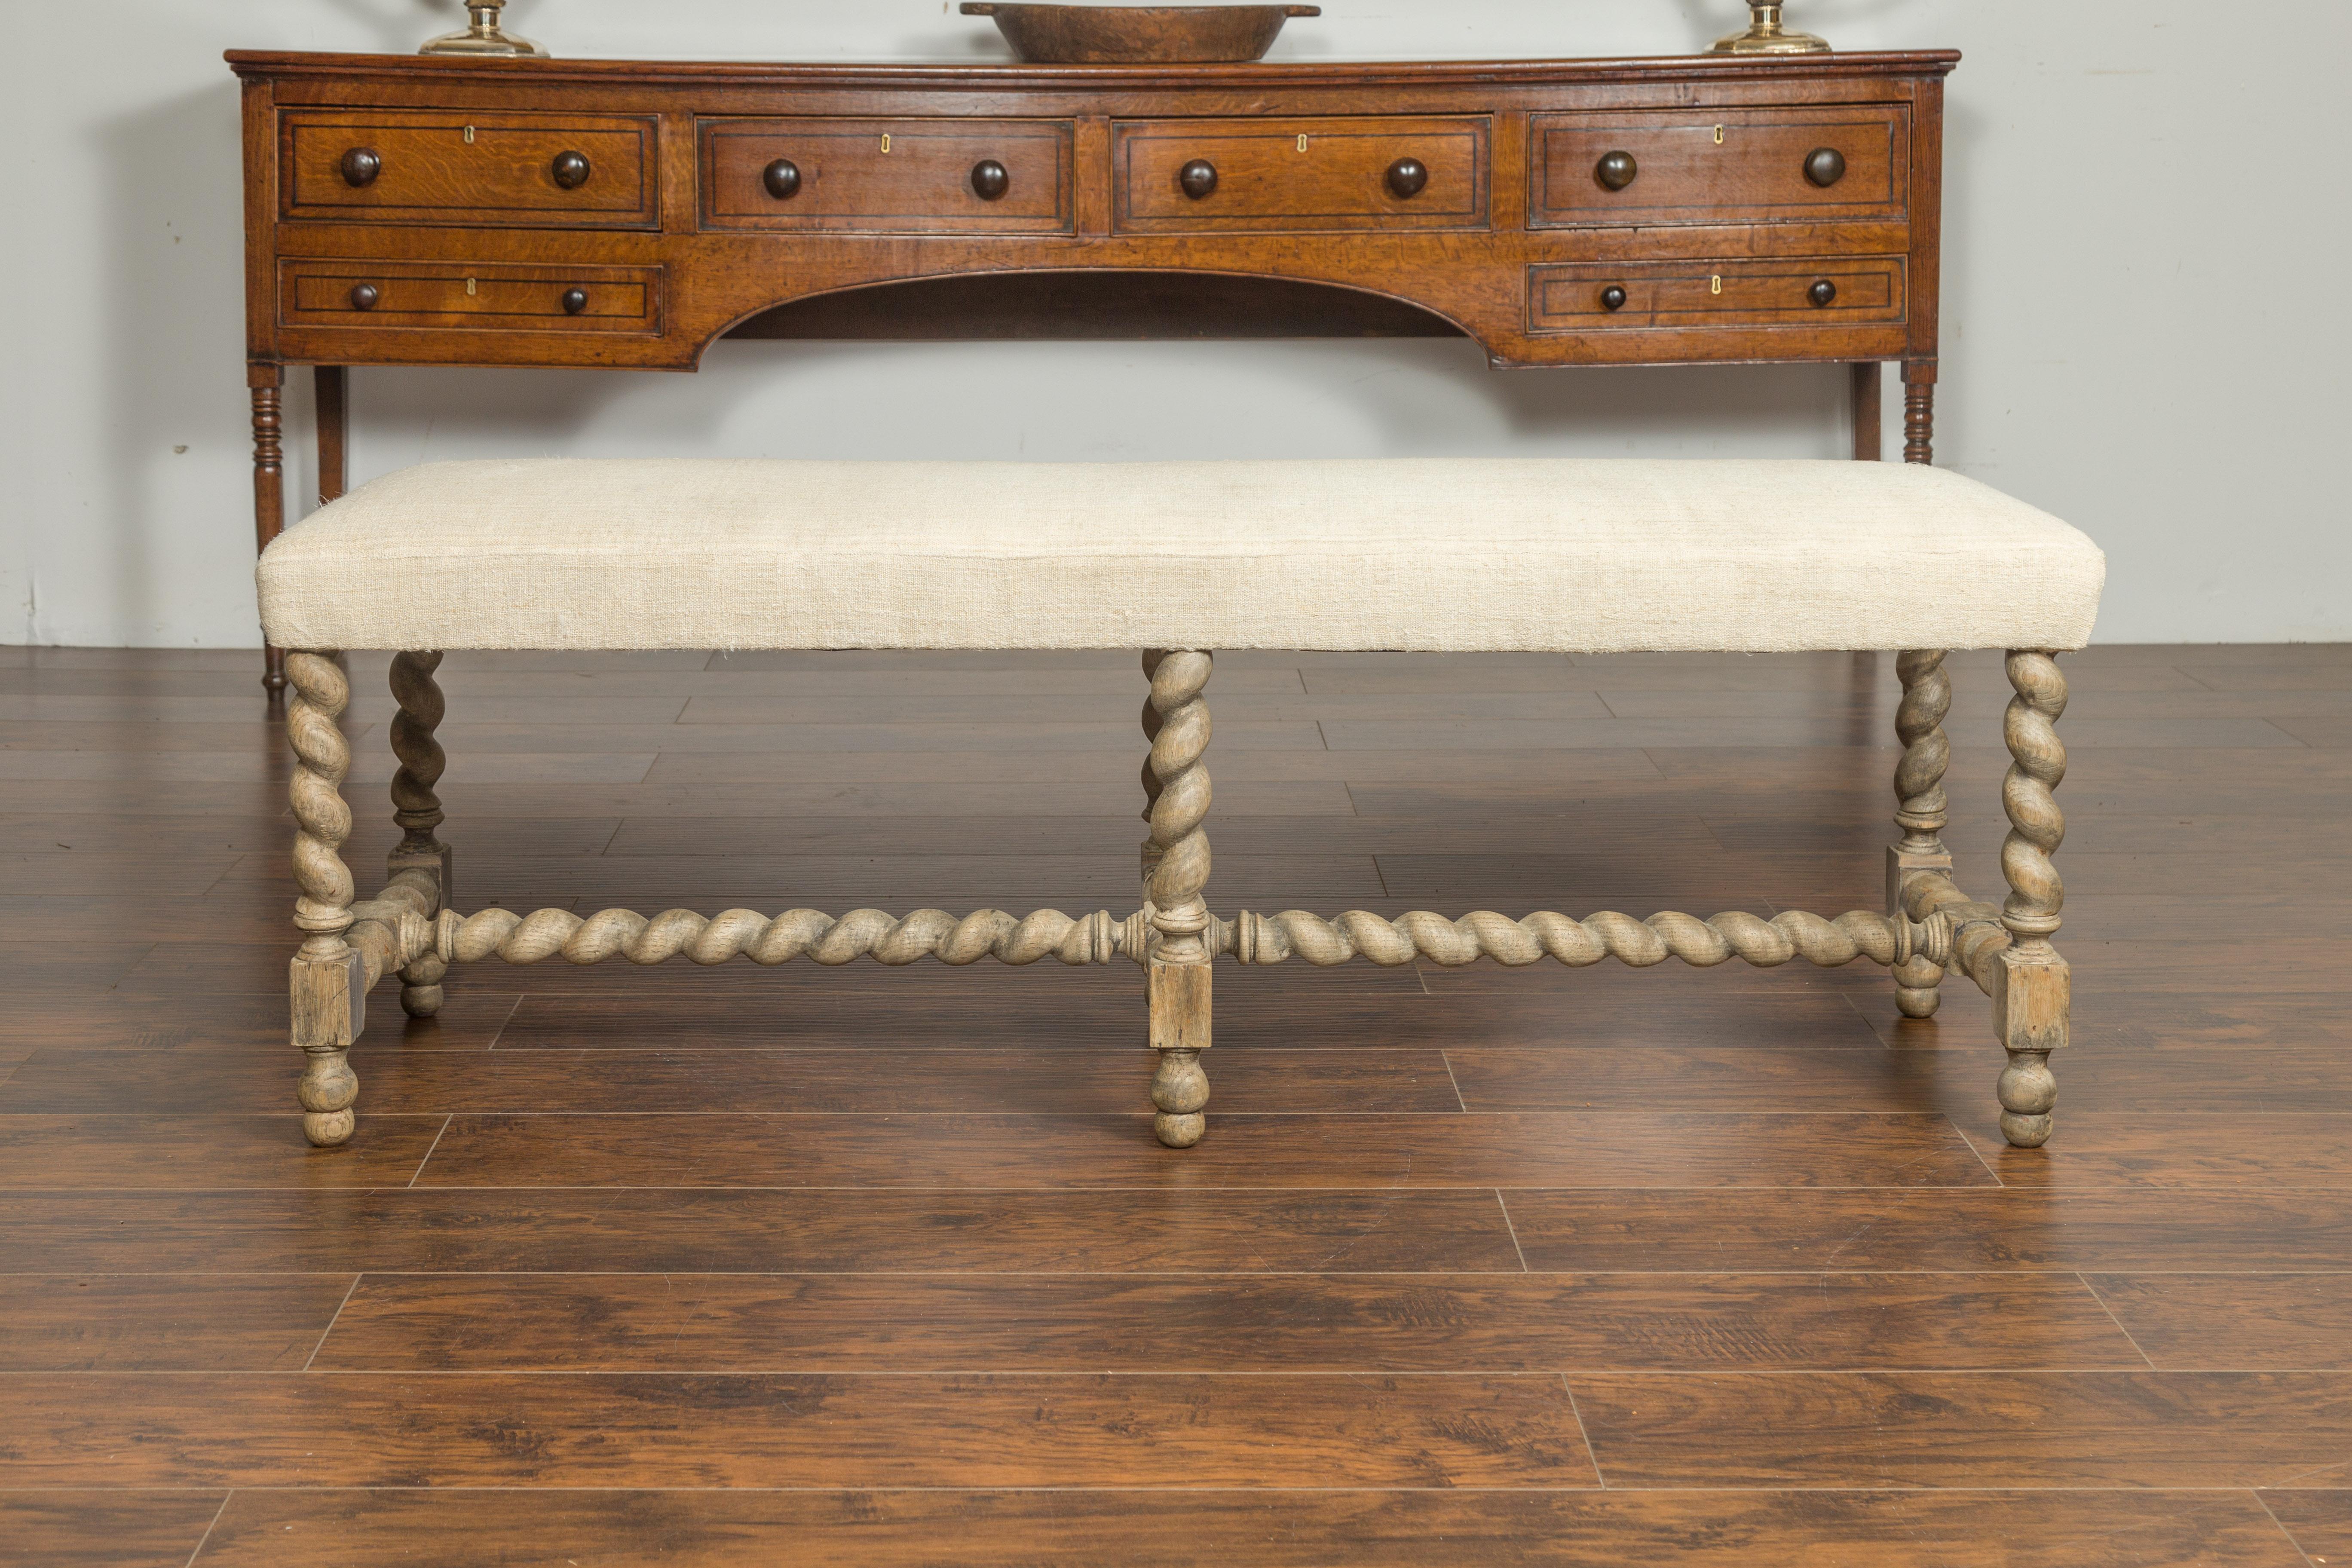 An English barley twist bleached wood bench from the late 19th century, with cross stretcher and new upholstery. Created in England during the last quarter of the 19th century, this bleached wooden bench features a long rectangular seat newly